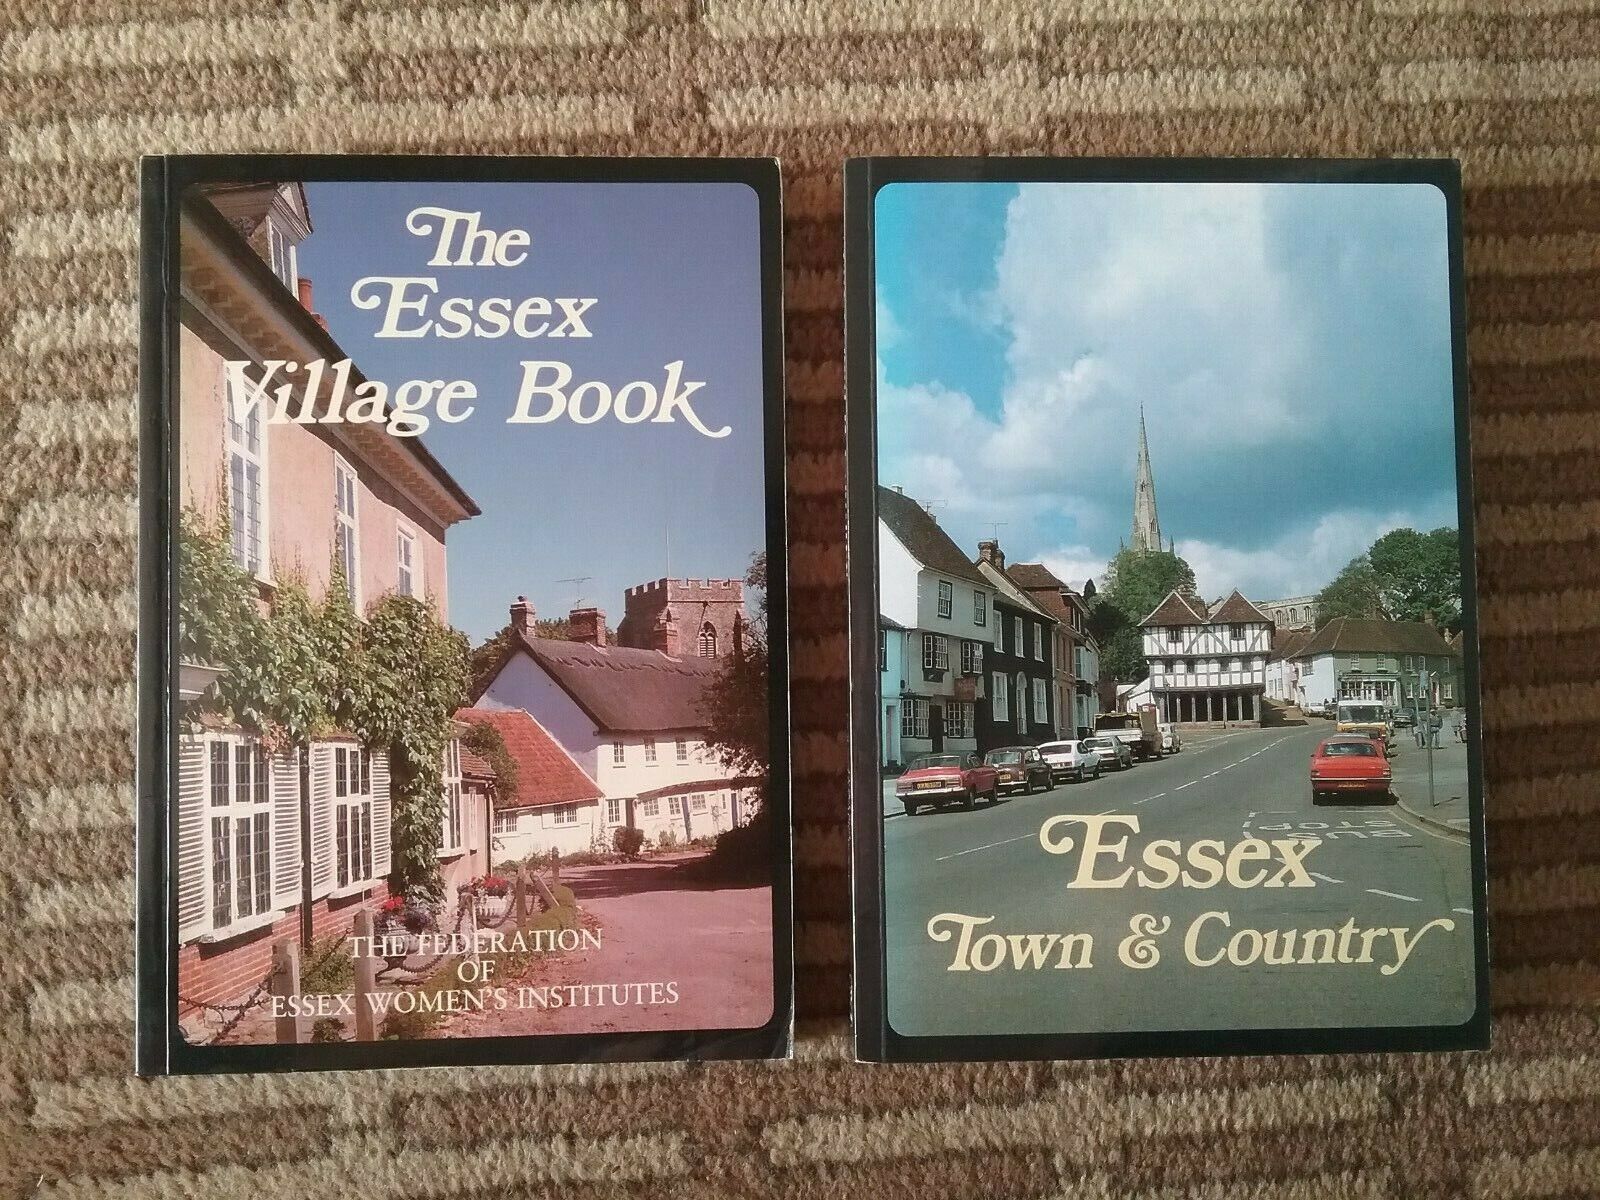 Essex: Town and Country and The Essex Village Book Paperbacks FEWI